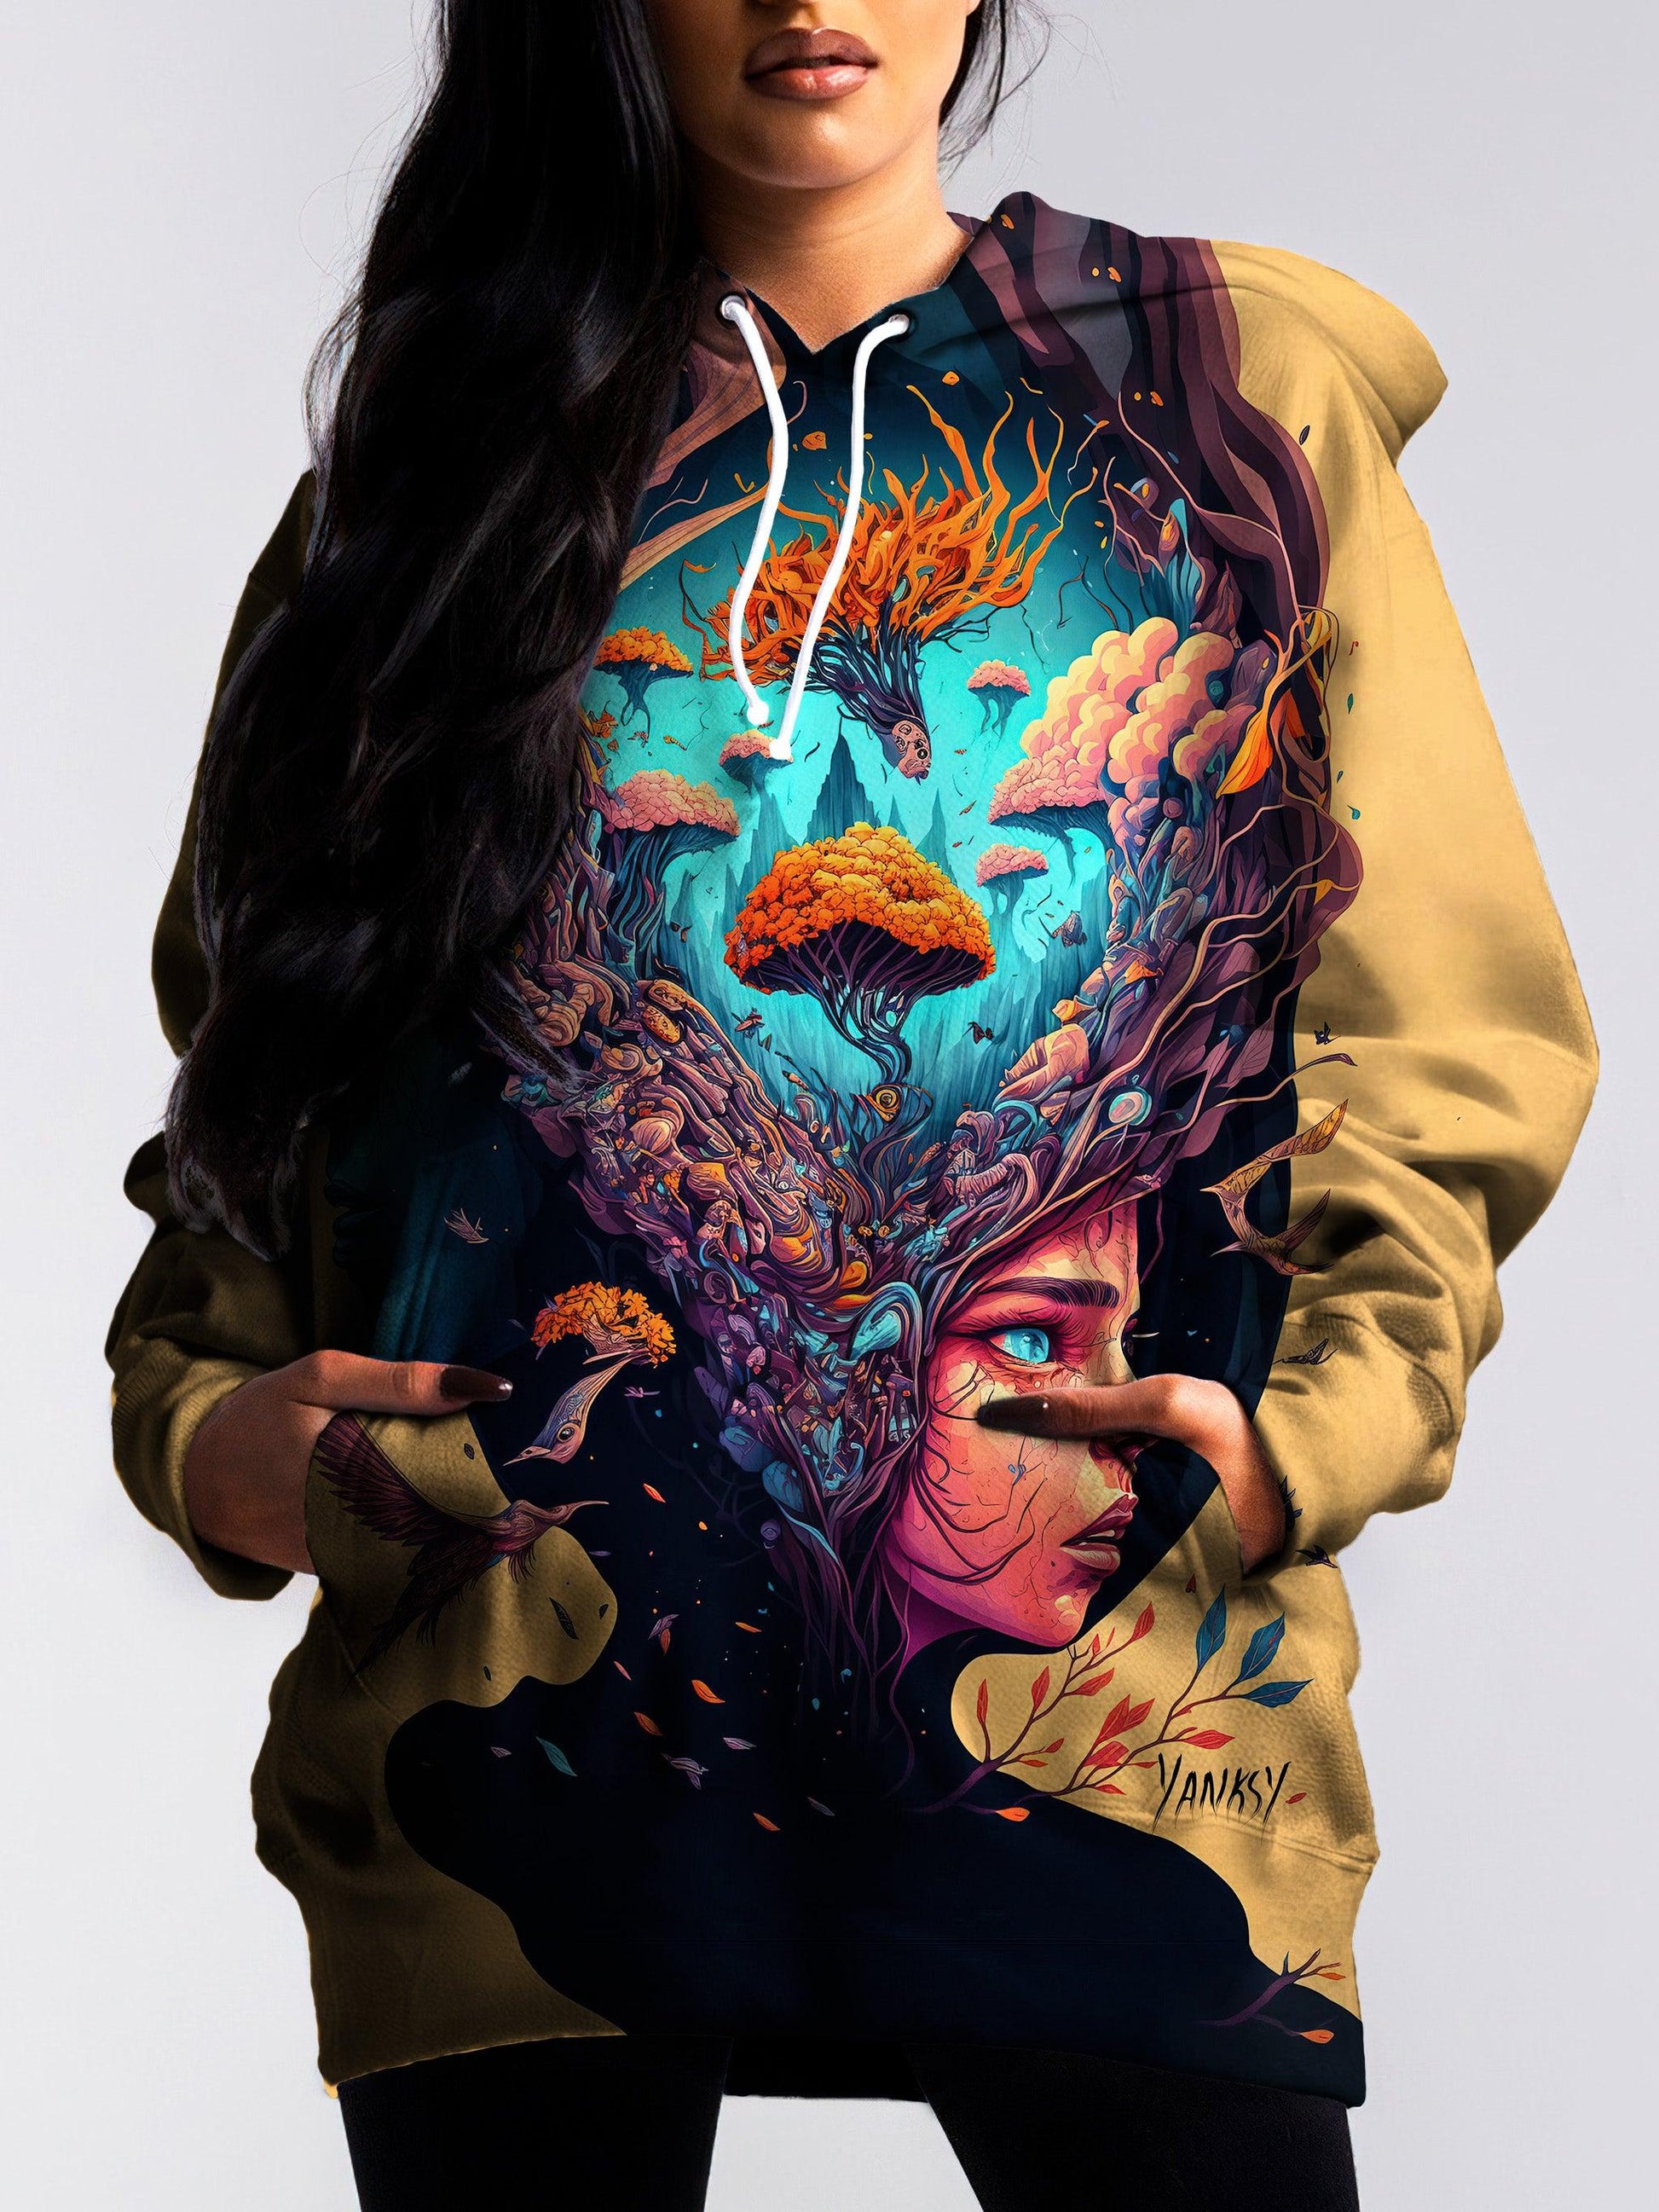 Stand out from the crowd in this vibrant and striking hoodie